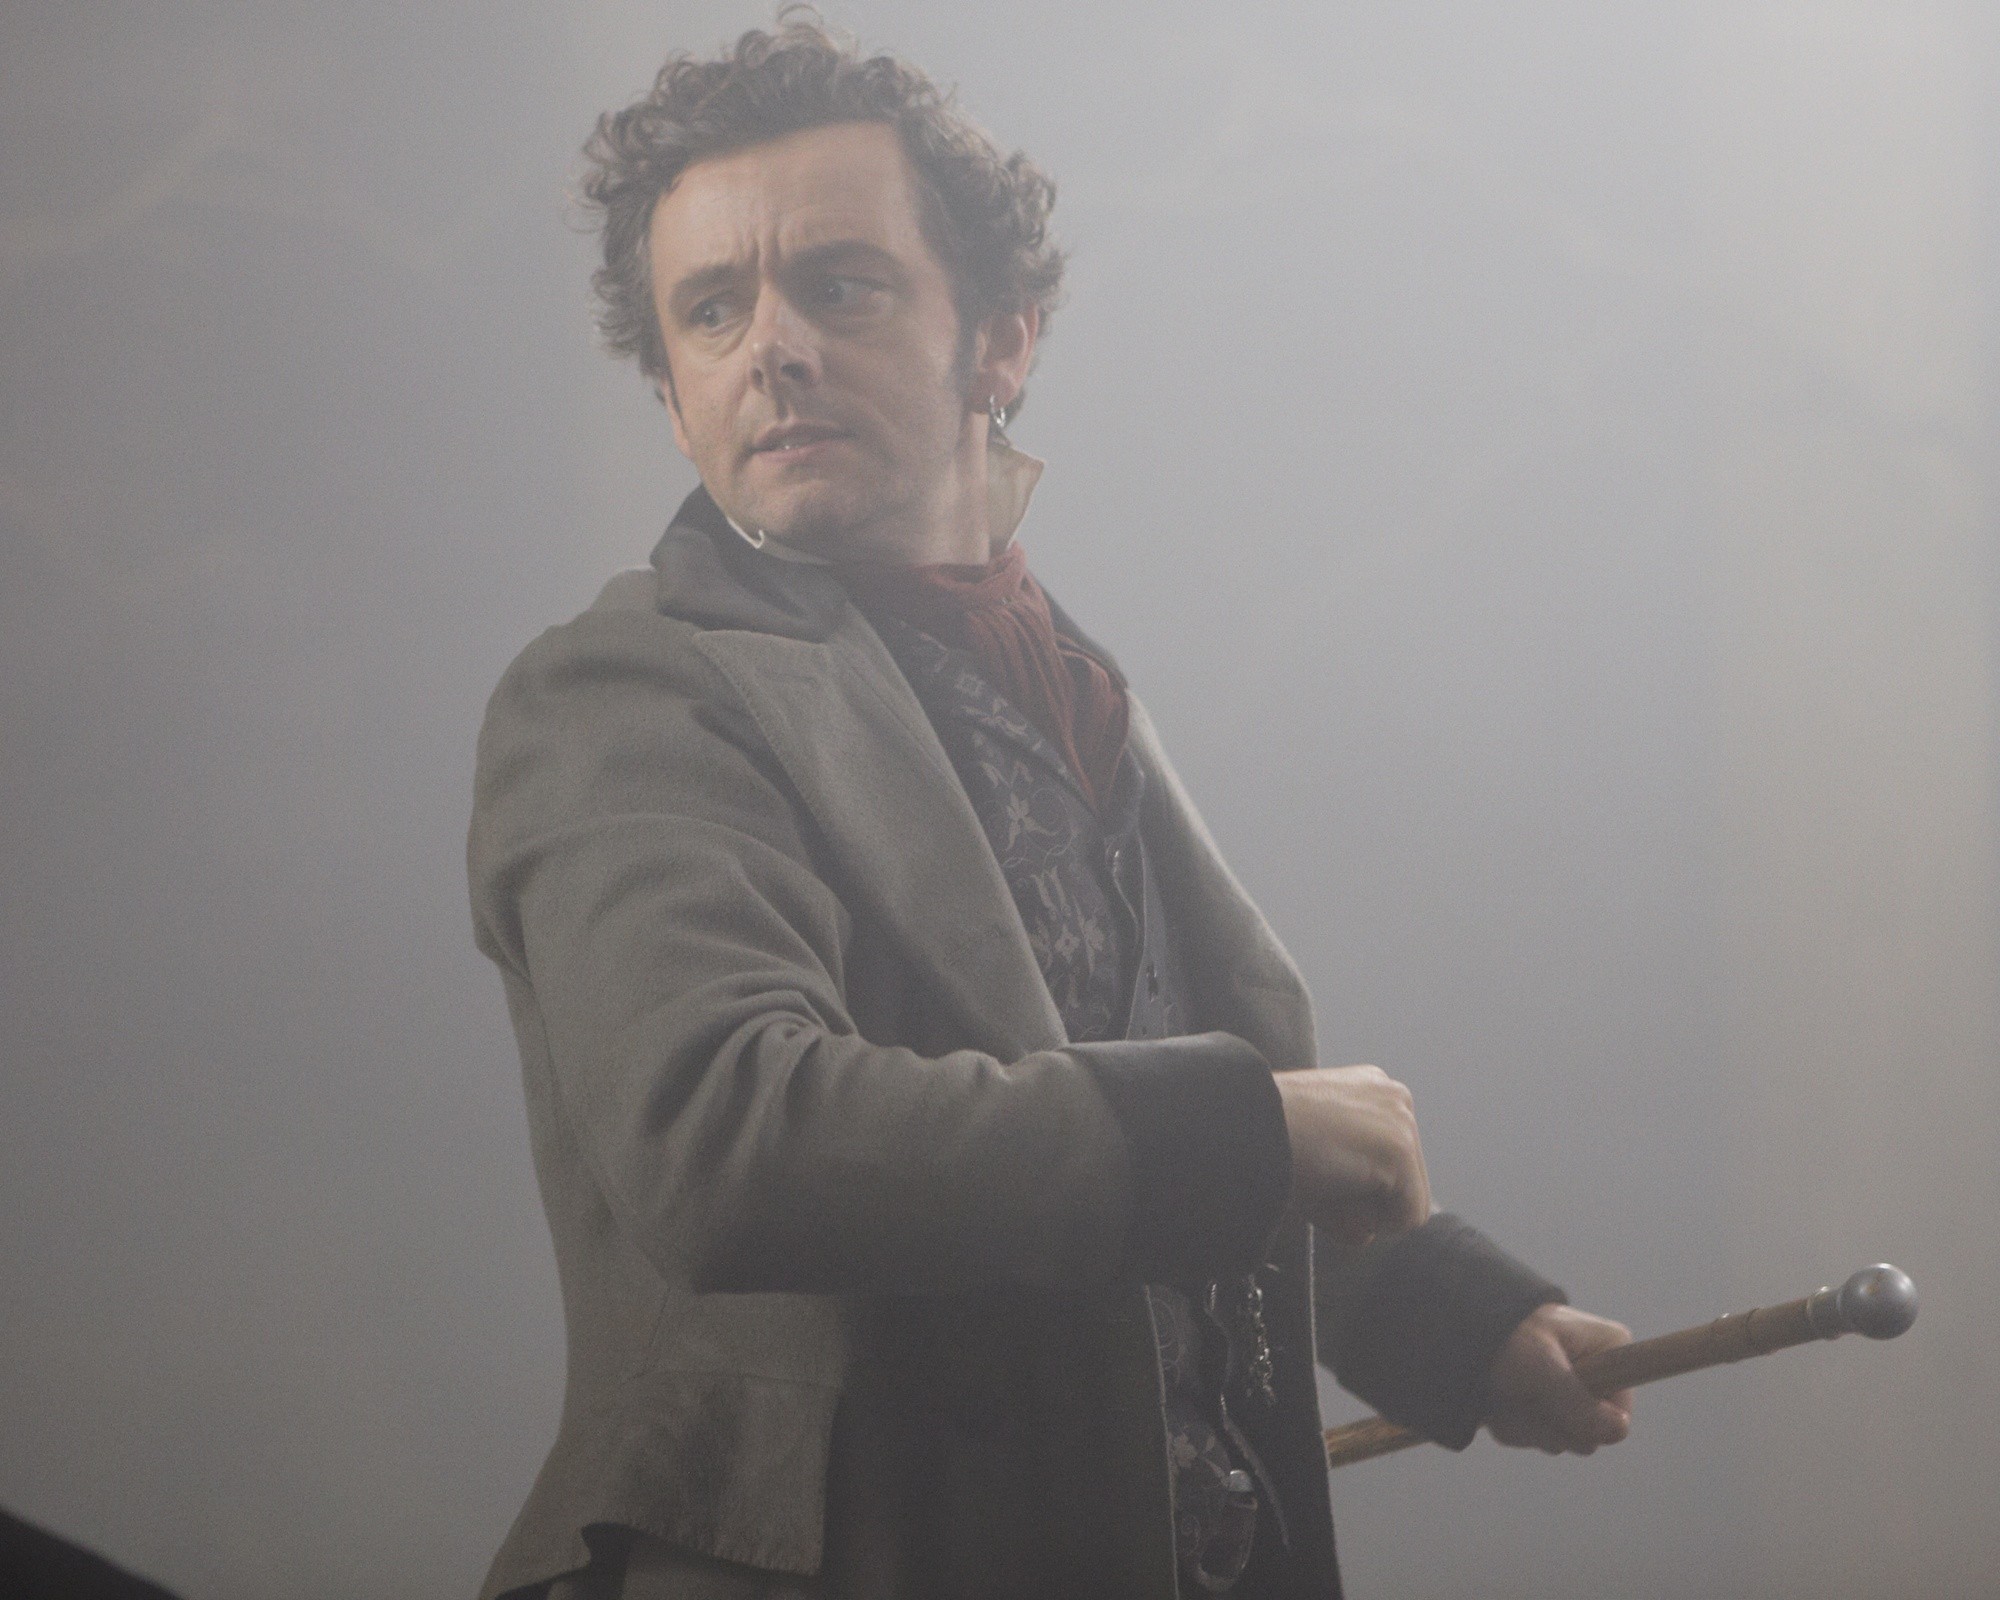 Michael Sheen stars as Charity in Image Entertainment's The Adventurer: The Curse of the Midas Box (2014)